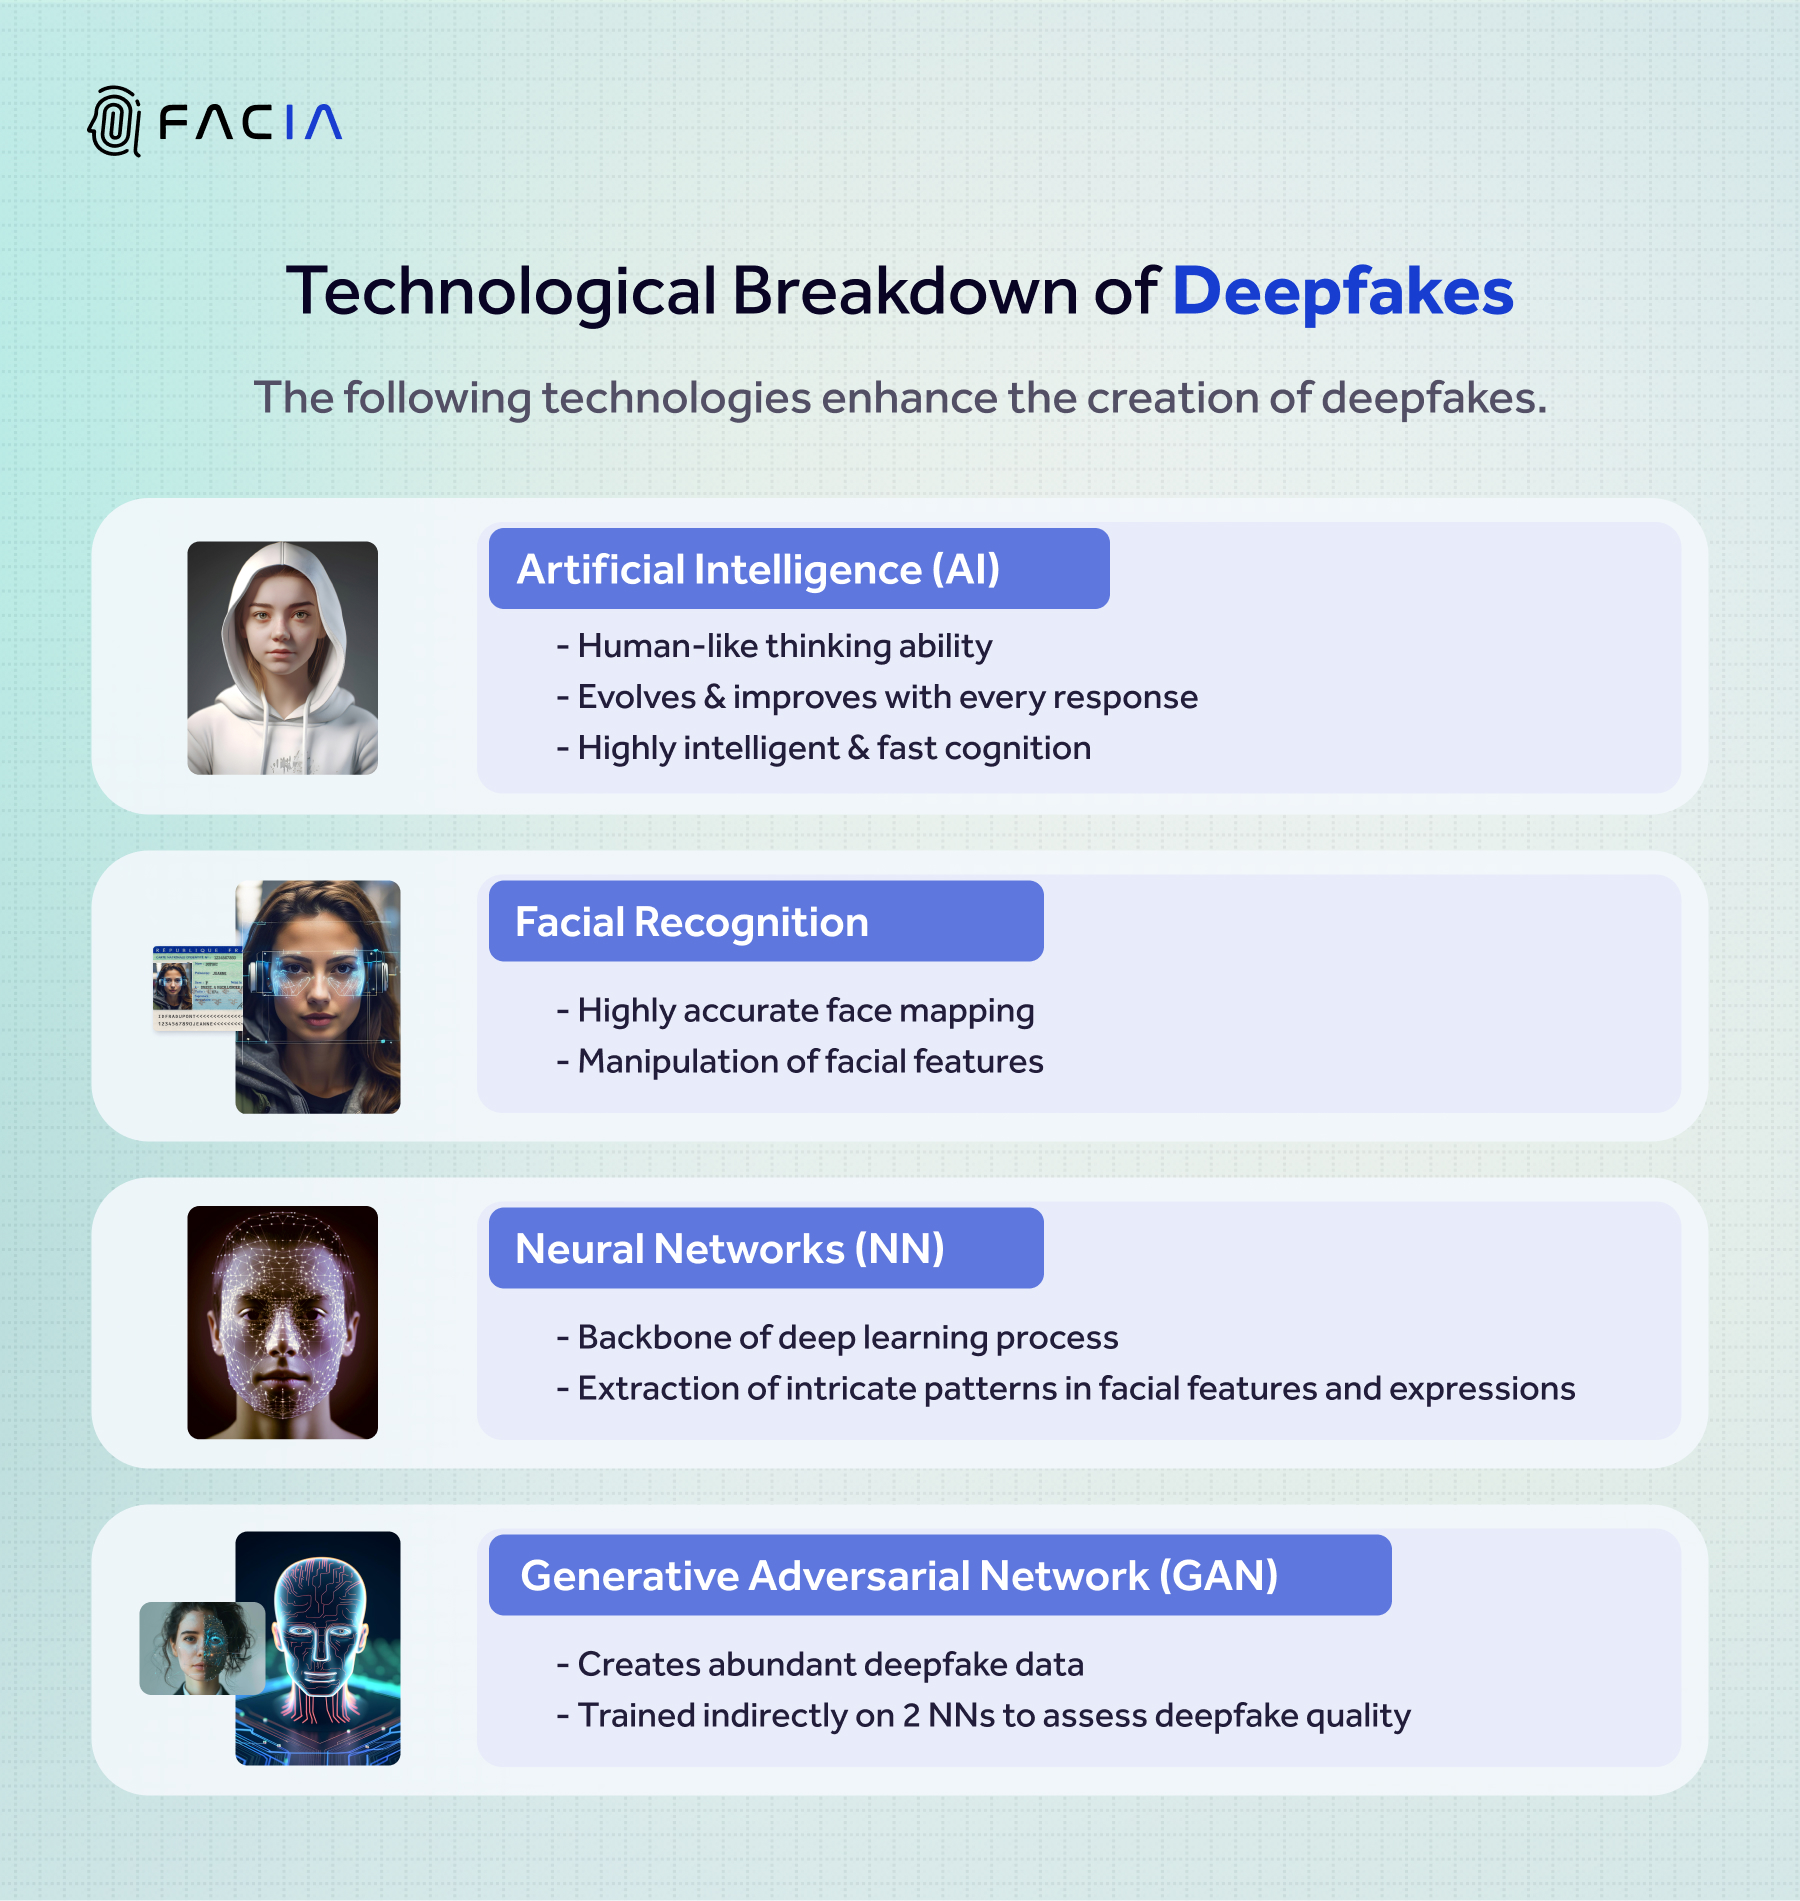 This Infographic shows the technological breakdown of deepfakes. It explains the major technologies involved in creating facial deepfakes.